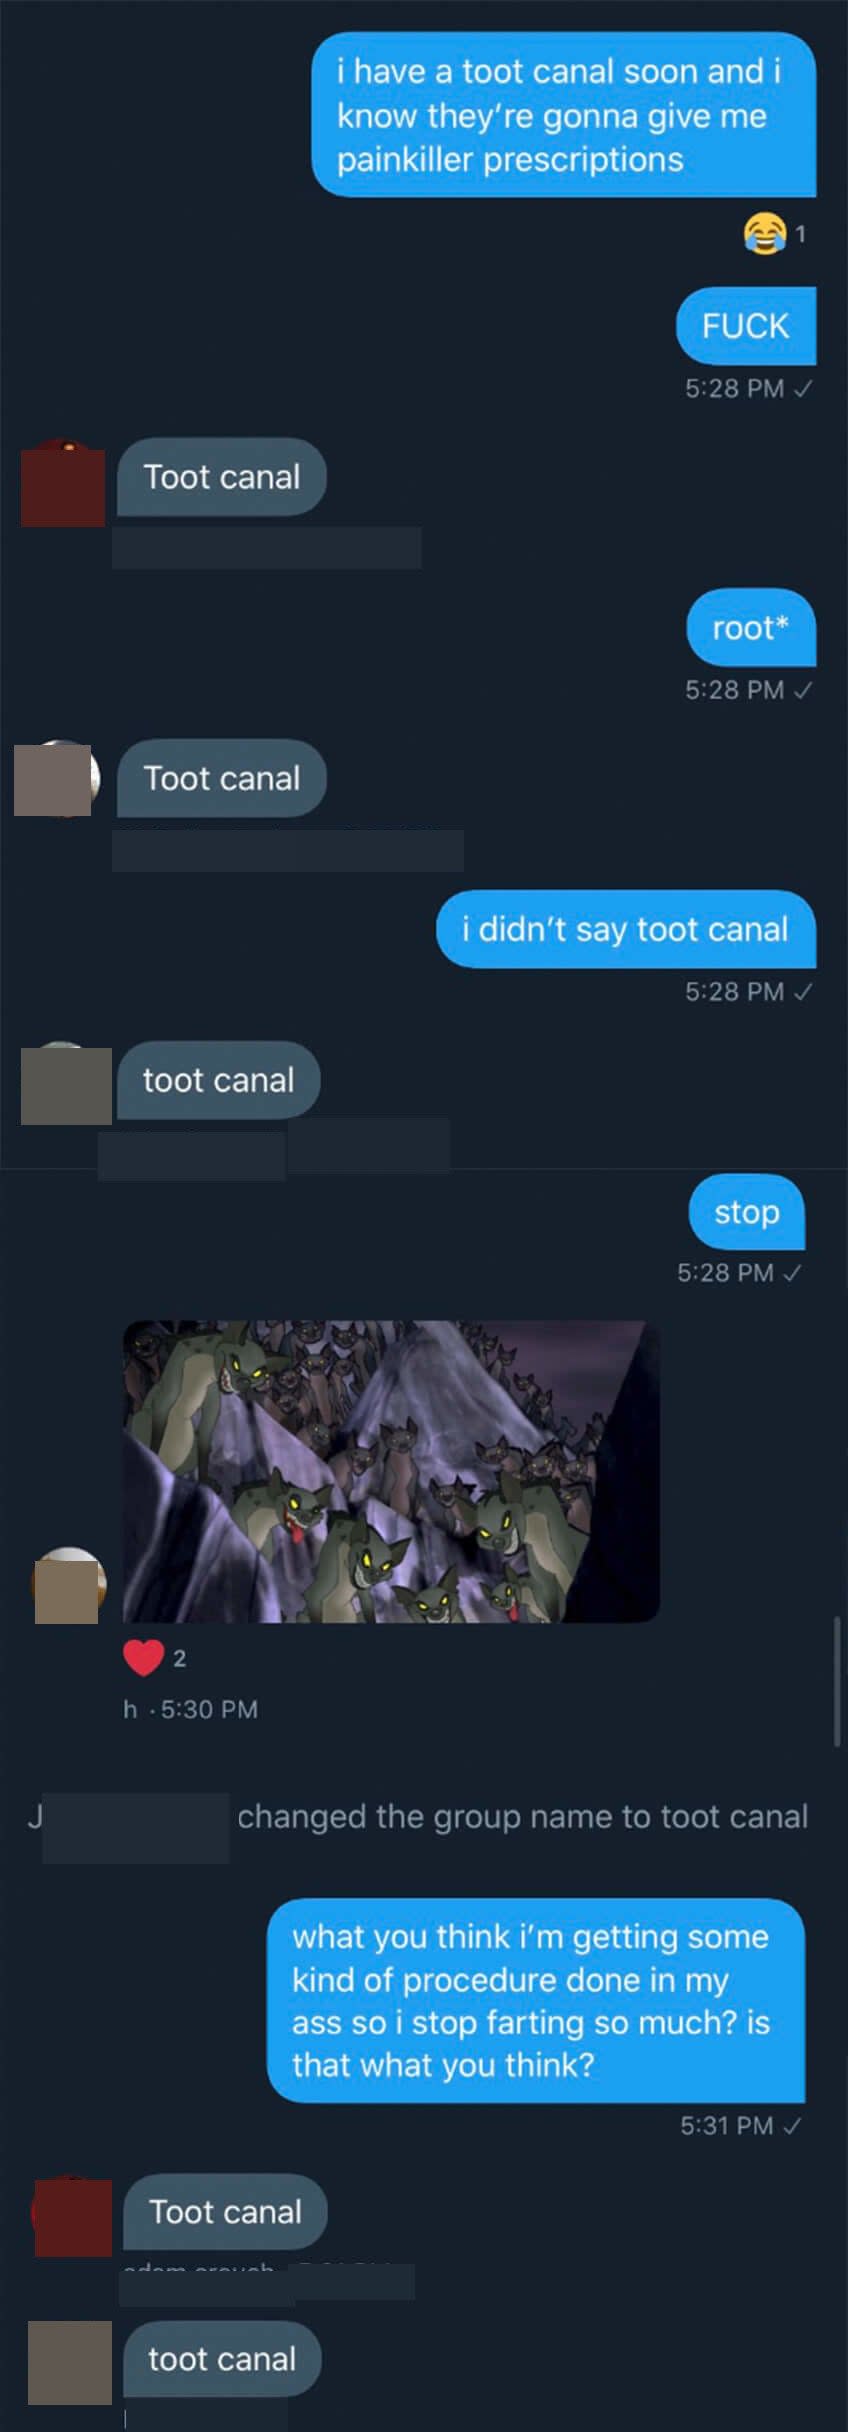 The first person in the group chat tries to tell everyone they're getting a root canal, but they type toot canal, and the whole family tells jokes about how much their butt will hurt after their toot canal